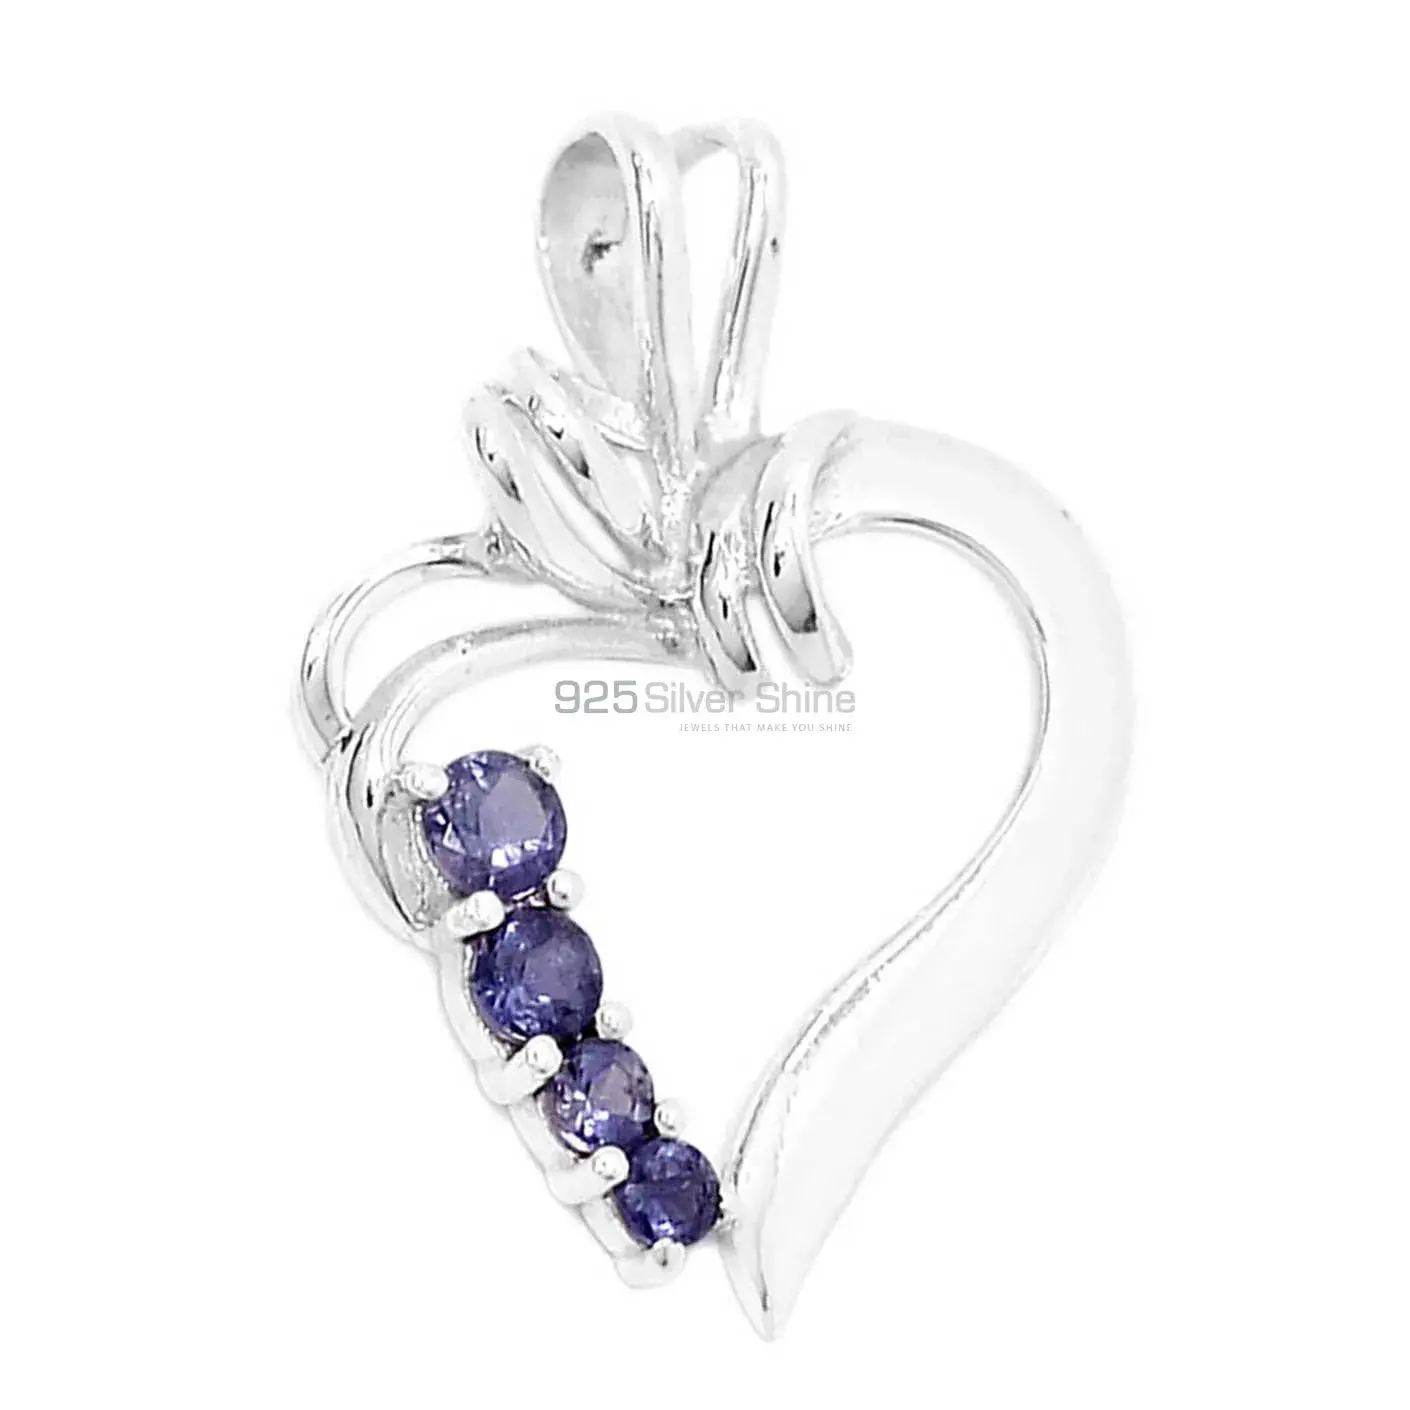 High Quality Iolite Gemstone Handmade Pendants In 925 Sterling Silver Jewelry 925SP297-4_0